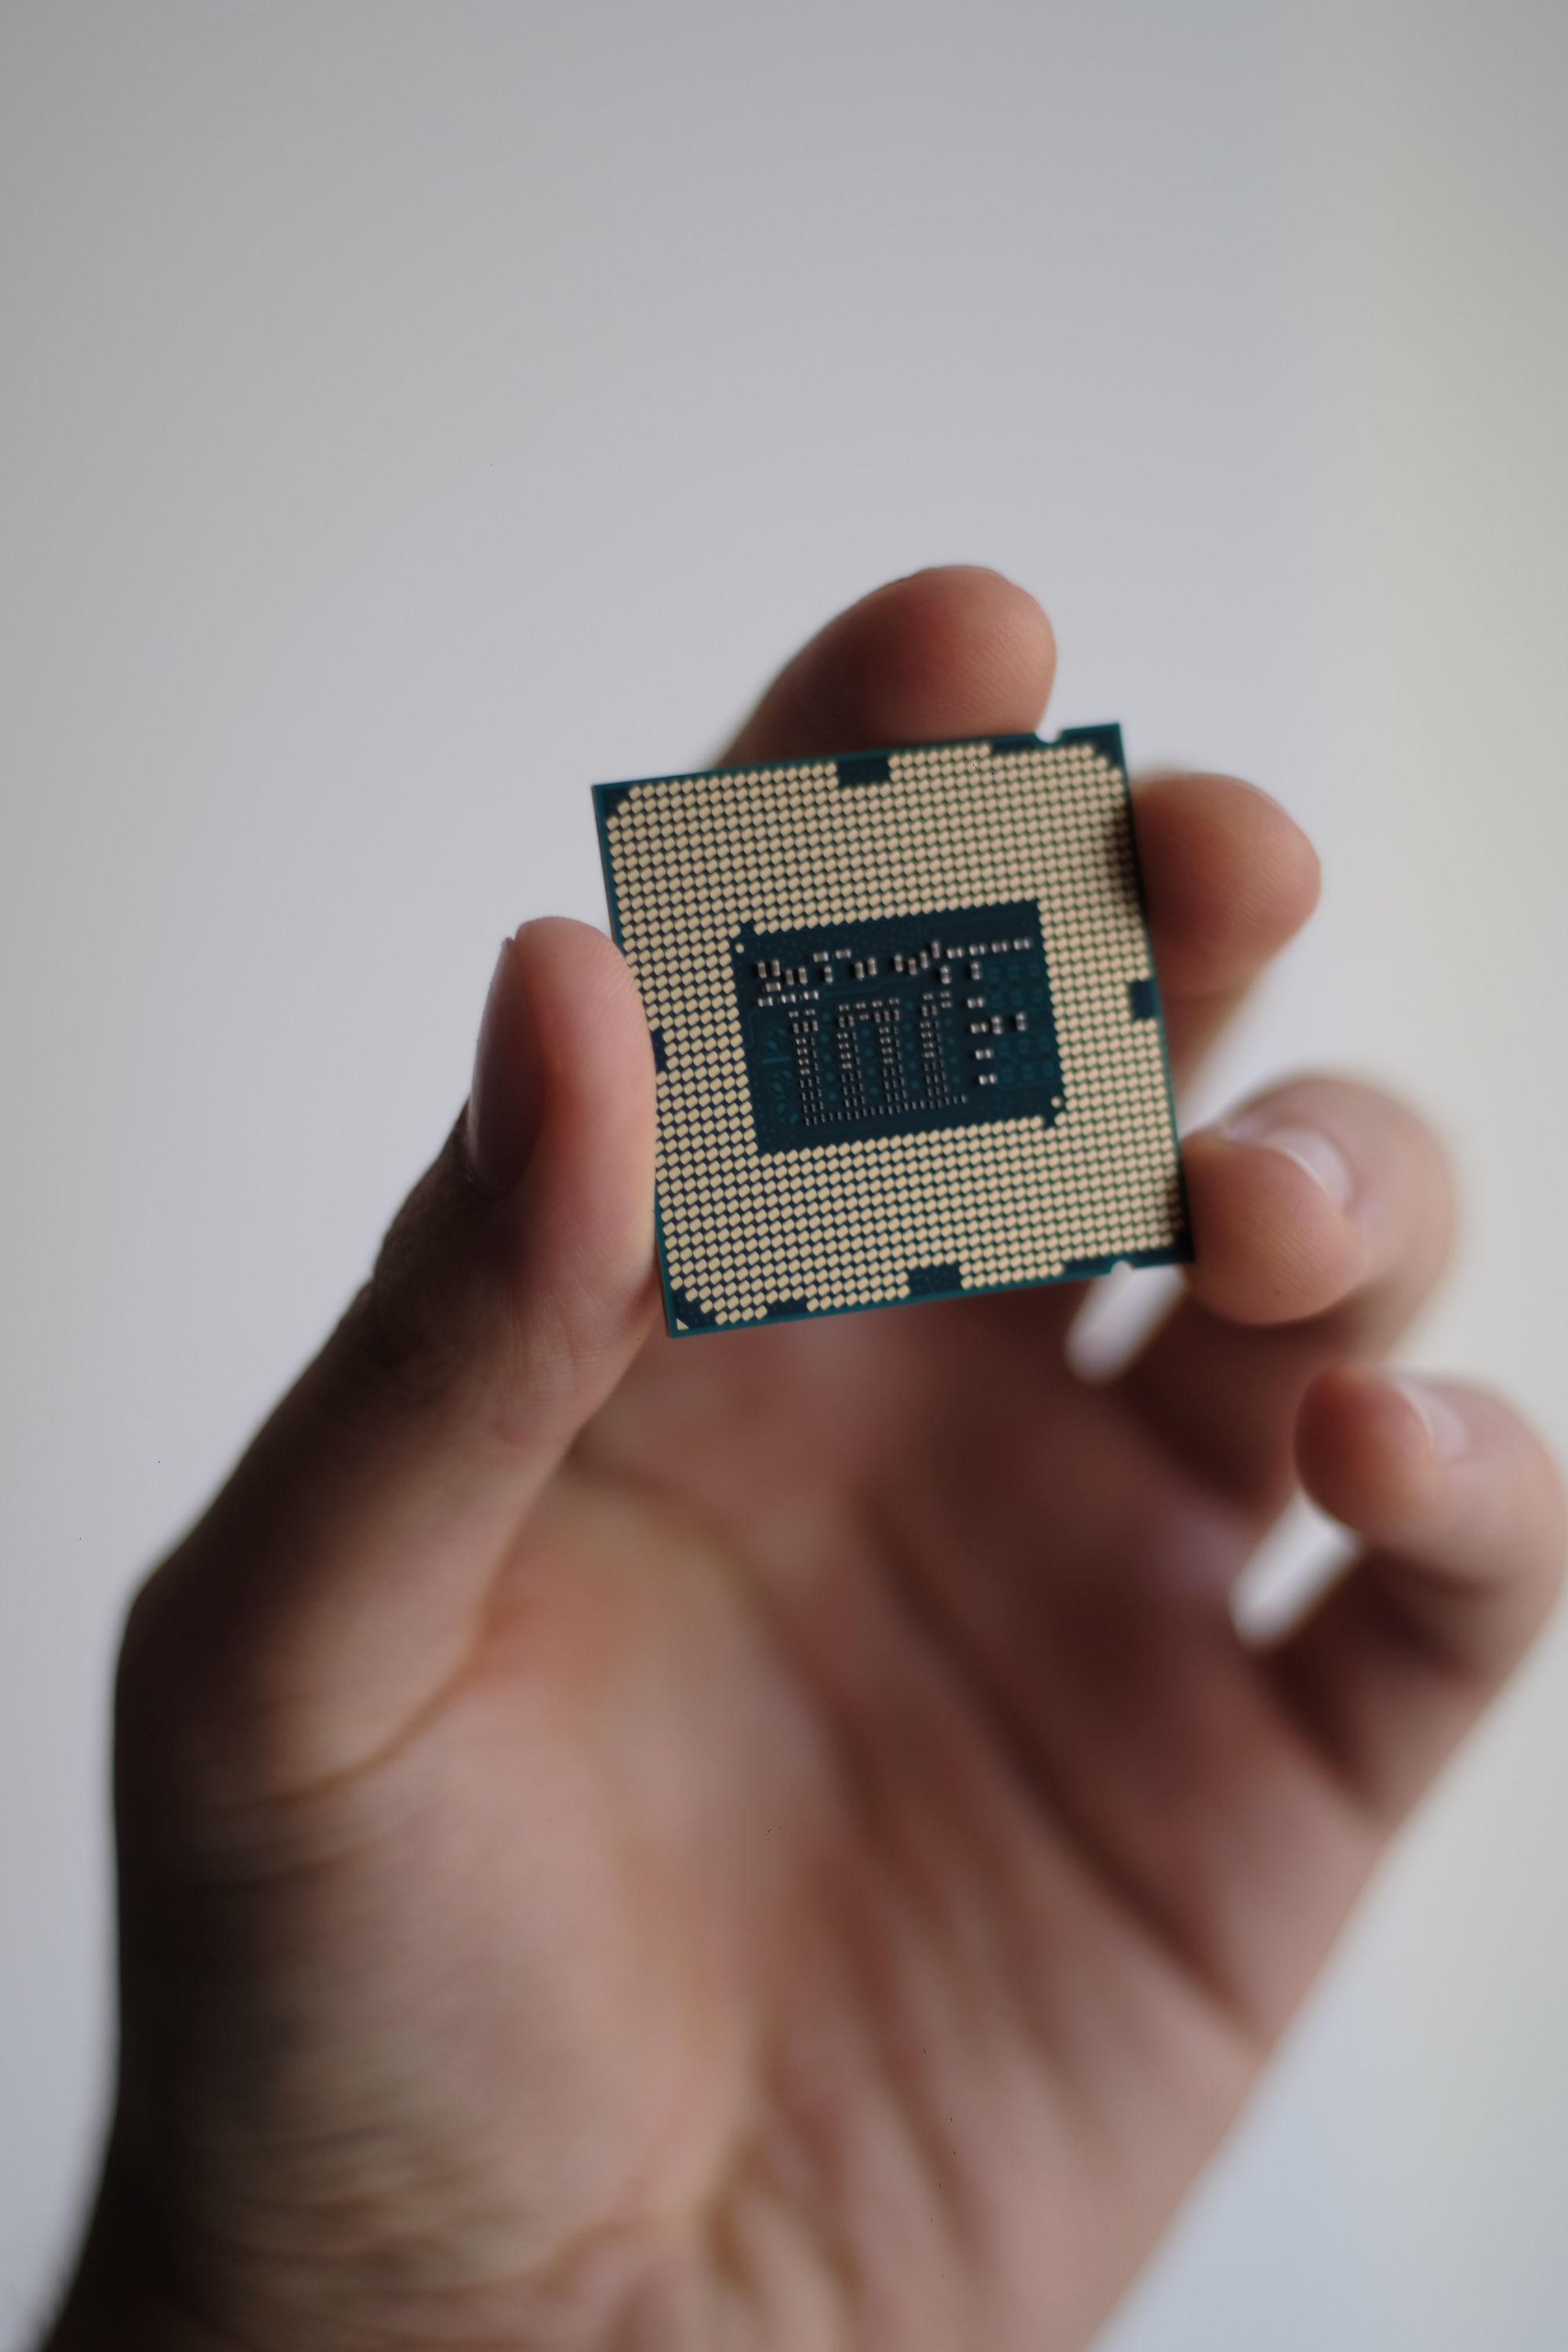 Kosciuszko Rejsende partikel What is CPU? Meaning, Definition, and What CPU Stands For